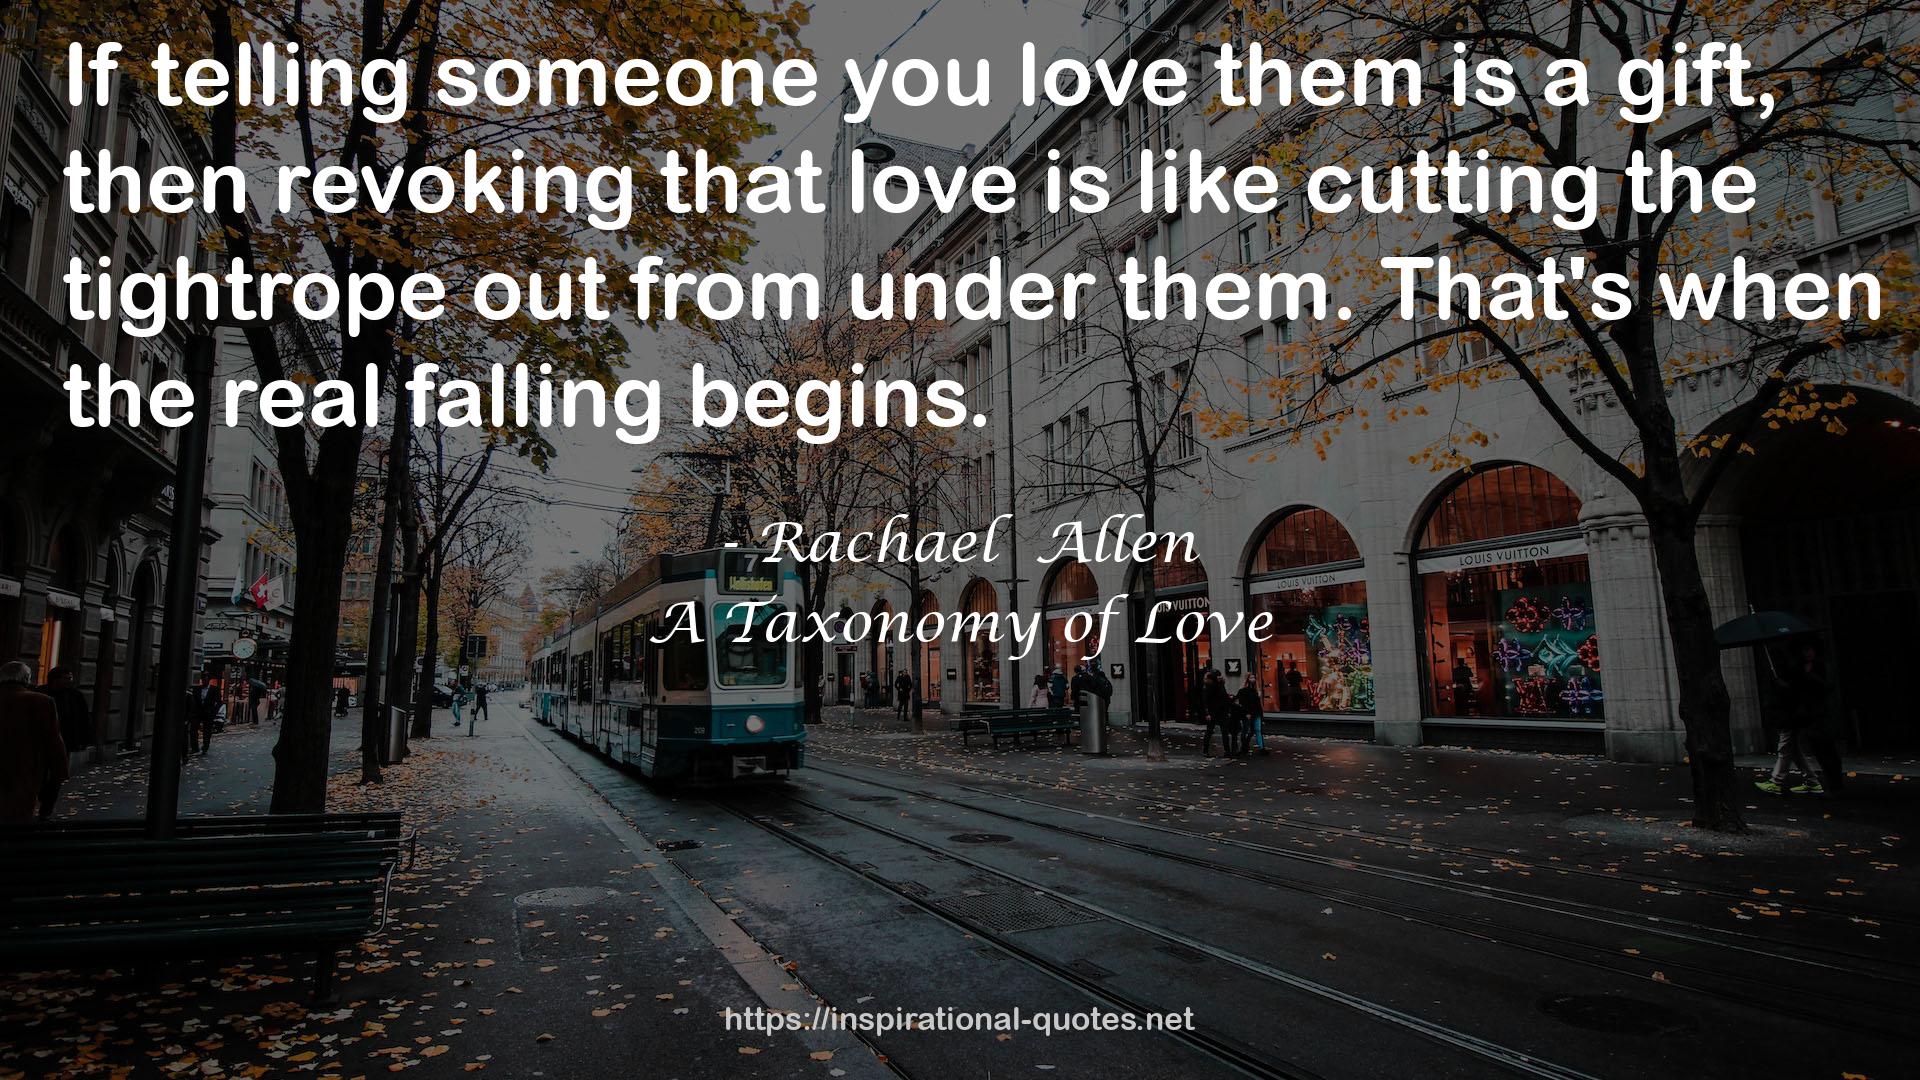 A Taxonomy of Love QUOTES